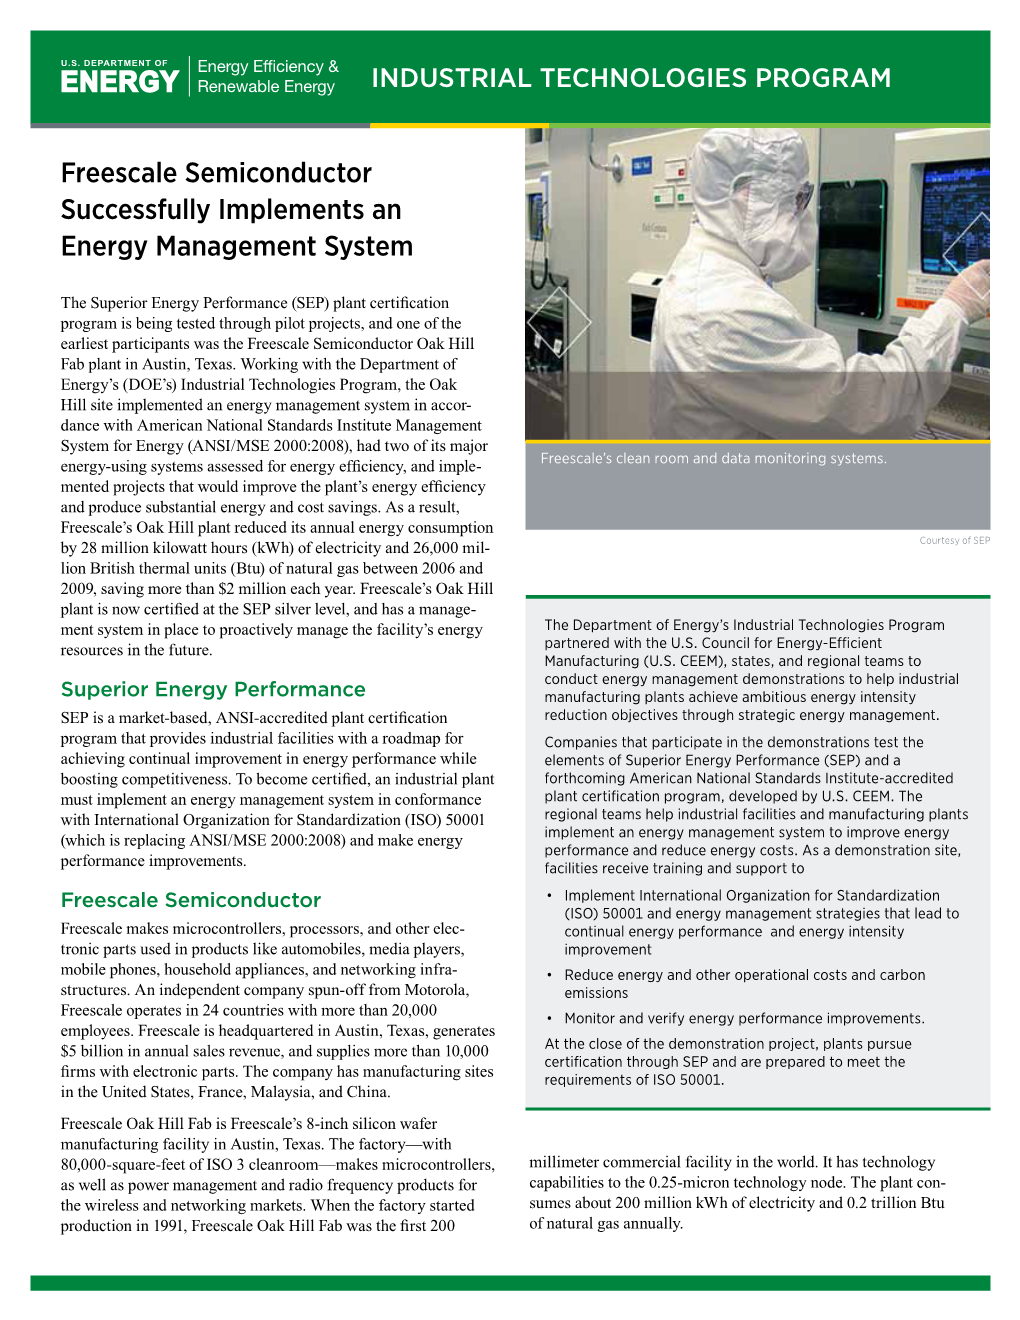 Freescale Semiconductor Successfully Implements an Energy Management System